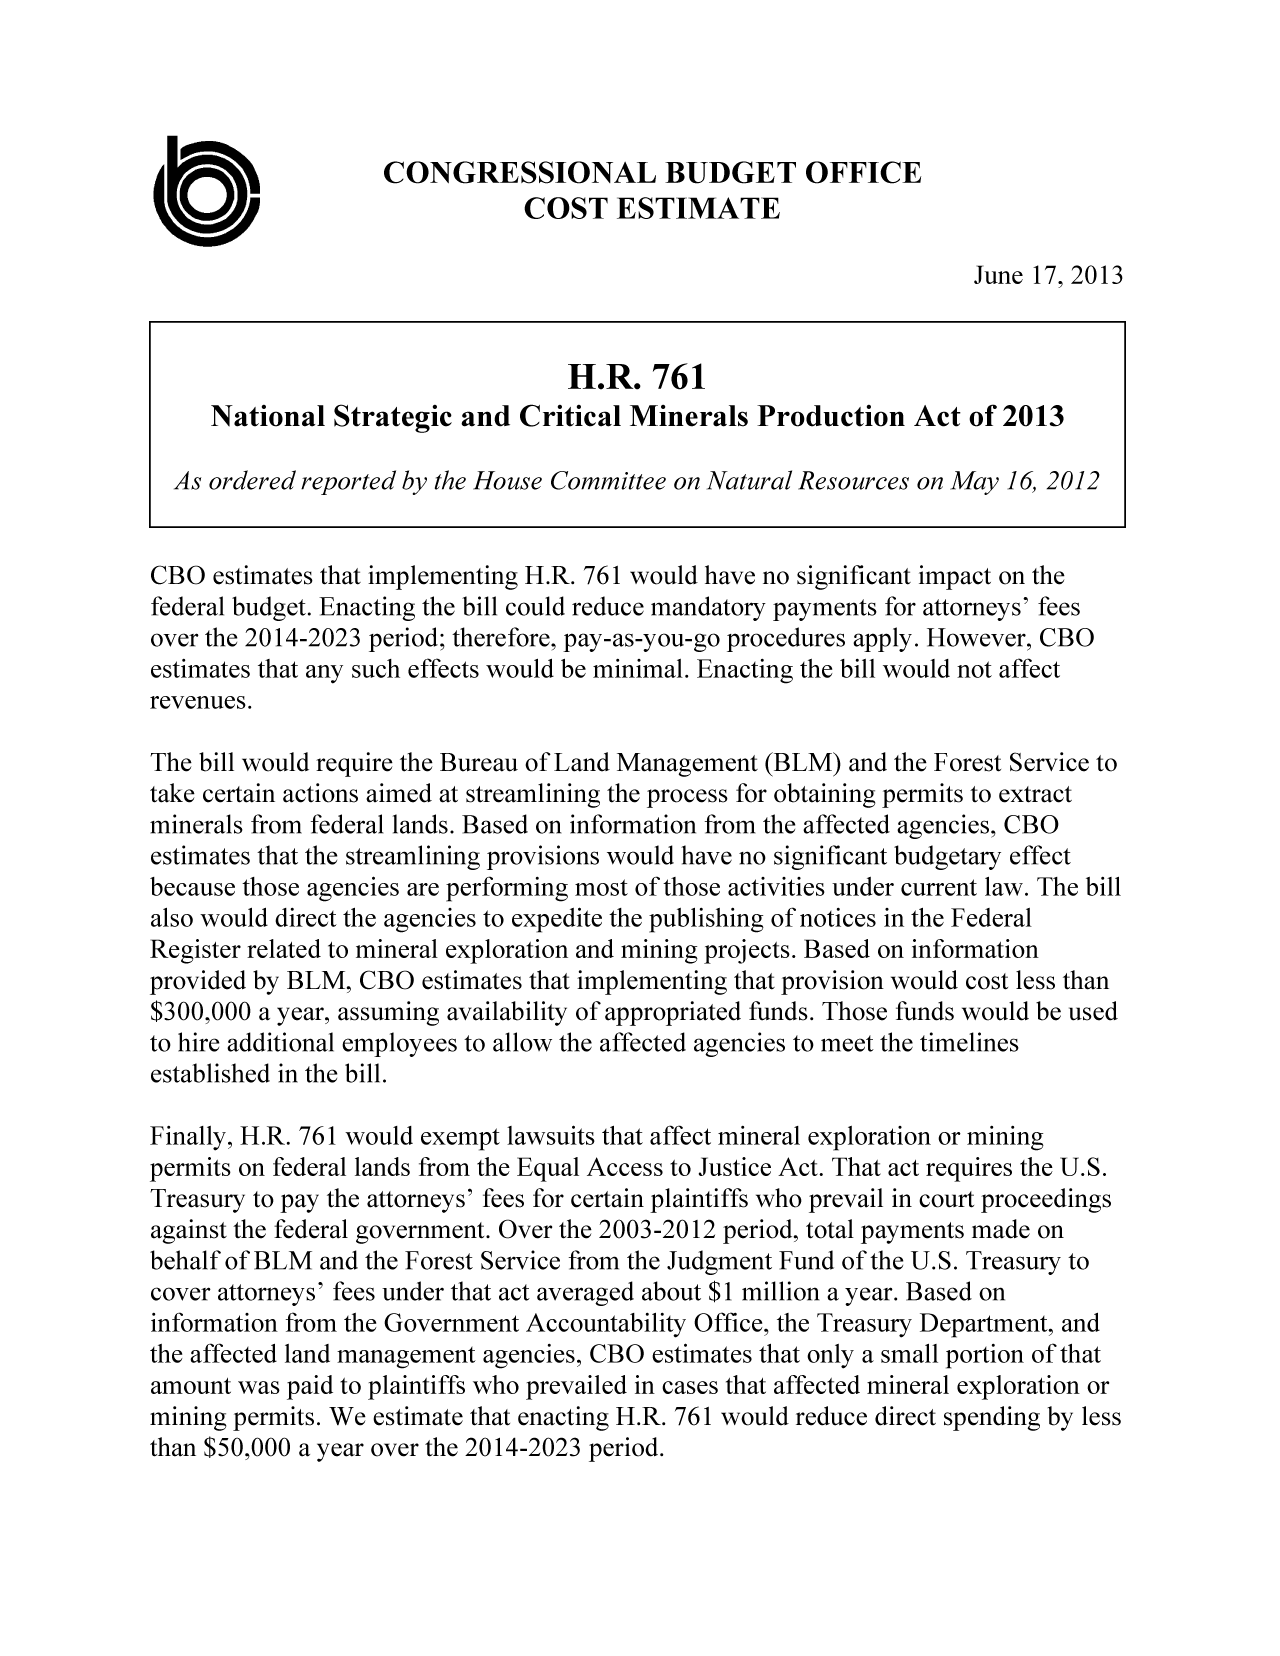 handle is hein.congrec/cbo11183 and id is 1 raw text is: CONGRESSIONAL BUDGET OFFICE
COST ESTIMATE
June 17, 2013
H.R. 761
National Strategic and Critical Minerals Production Act of 2013
As ordered reported by the House Committee on Natural Resources on May 16, 2012
CBO estimates that implementing H.R. 761 would have no significant impact on the
federal budget. Enacting the bill could reduce mandatory payments for attorneys' fees
over the 2014-2023 period; therefore, pay-as-you-go procedures apply. However, CBO
estimates that any such effects would be minimal. Enacting the bill would not affect
revenues.
The bill would require the Bureau of Land Management (BLM) and the Forest Service to
take certain actions aimed at streamlining the process for obtaining permits to extract
minerals from federal lands. Based on information from the affected agencies, CBO
estimates that the streamlining provisions would have no significant budgetary effect
because those agencies are performing most of those activities under current law. The bill
also would direct the agencies to expedite the publishing of notices in the Federal
Register related to mineral exploration and mining projects. Based on information
provided by BLM, CBO estimates that implementing that provision would cost less than
$300,000 a year, assuming availability of appropriated funds. Those funds would be used
to hire additional employees to allow the affected agencies to meet the timelines
established in the bill.
Finally, H.R. 761 would exempt lawsuits that affect mineral exploration or mining
permits on federal lands from the Equal Access to Justice Act. That act requires the U.S.
Treasury to pay the attorneys' fees for certain plaintiffs who prevail in court proceedings
against the federal government. Over the 2003-2012 period, total payments made on
behalf of BLM and the Forest Service from the Judgment Fund of the U.S. Treasury to
cover attorneys' fees under that act averaged about $1 million a year. Based on
information from the Government Accountability Office, the Treasury Department, and
the affected land management agencies, CBO estimates that only a small portion of that
amount was paid to plaintiffs who prevailed in cases that affected mineral exploration or
mining permits. We estimate that enacting HIR. 761 would reduce direct spending by less
than $50,000 a year over the 20 14-2023 period.


